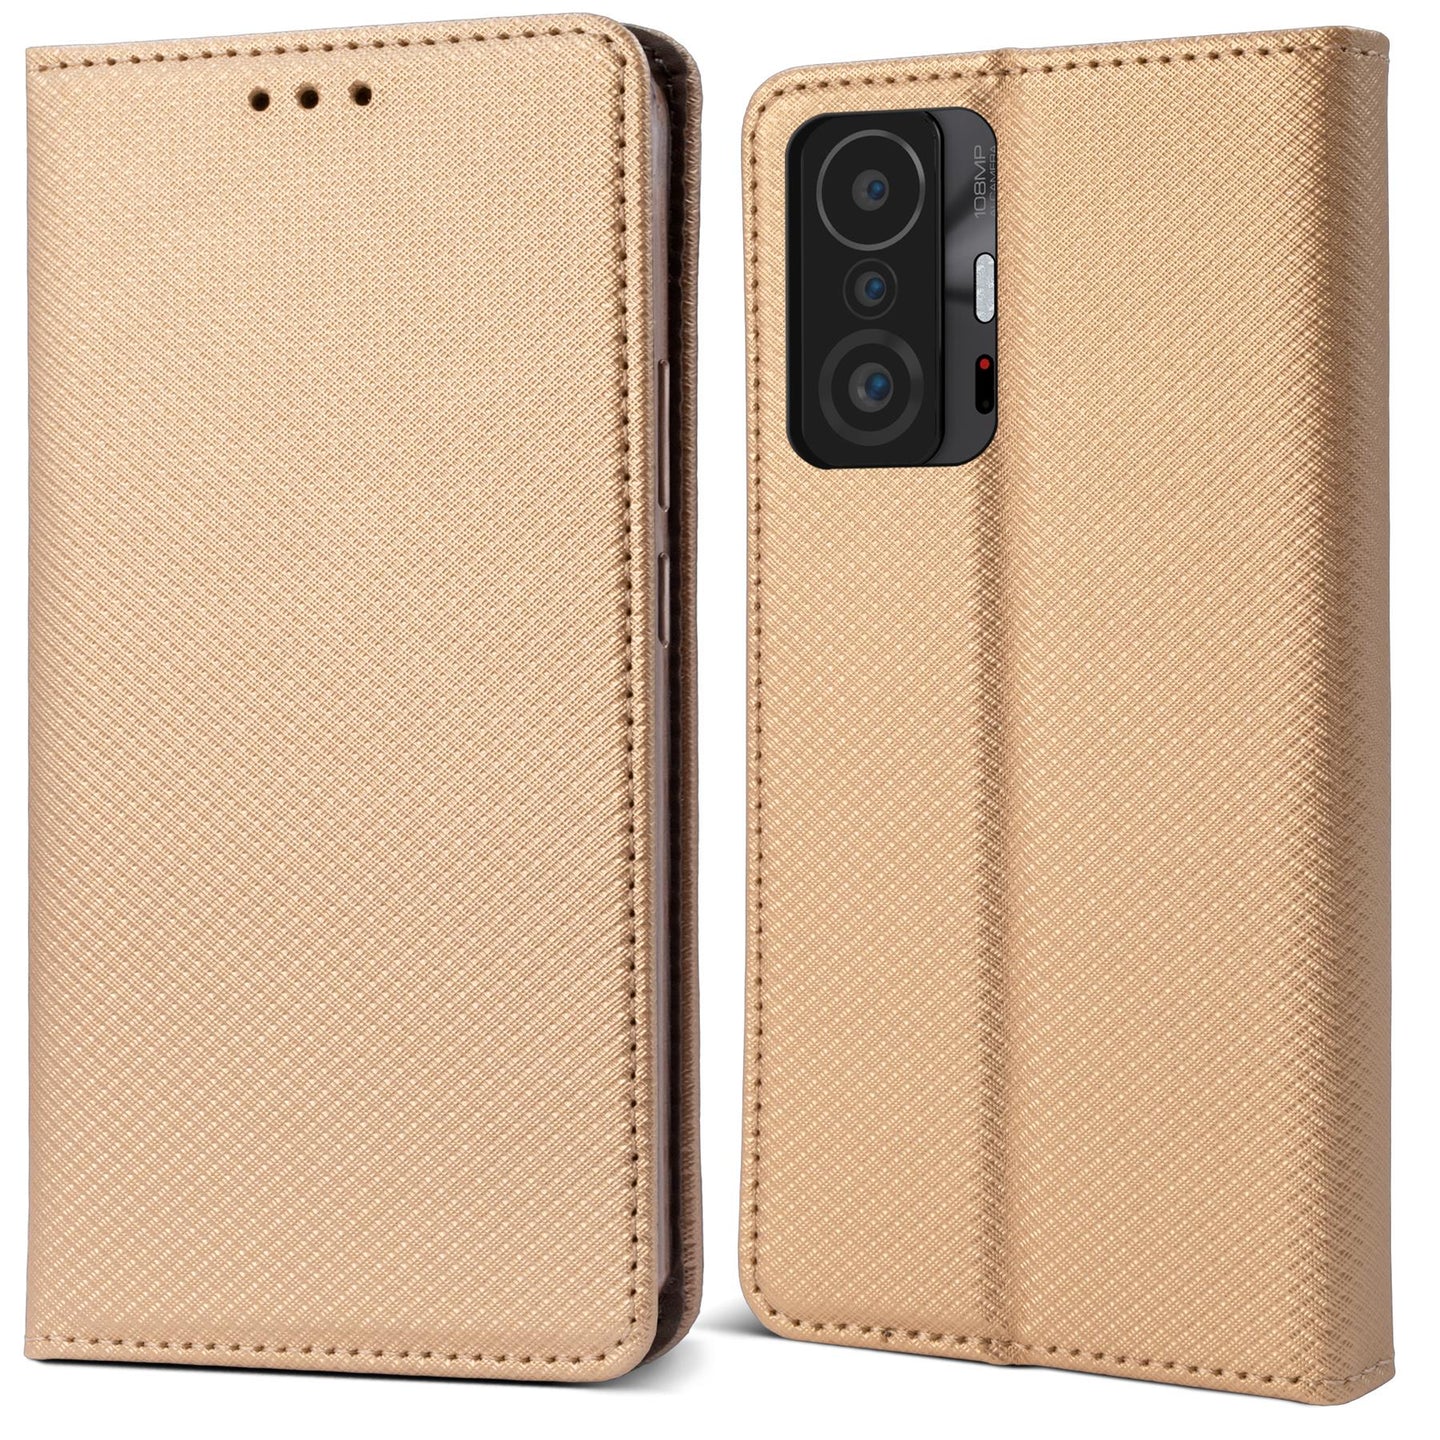 Moozy Case Flip Cover for Xiaomi 11T and Xiaomi 11T Pro, Gold - Smart Magnetic Flip Case Flip Folio Wallet Case with Card Holder and Stand, Credit Card Slots, Kickstand Function